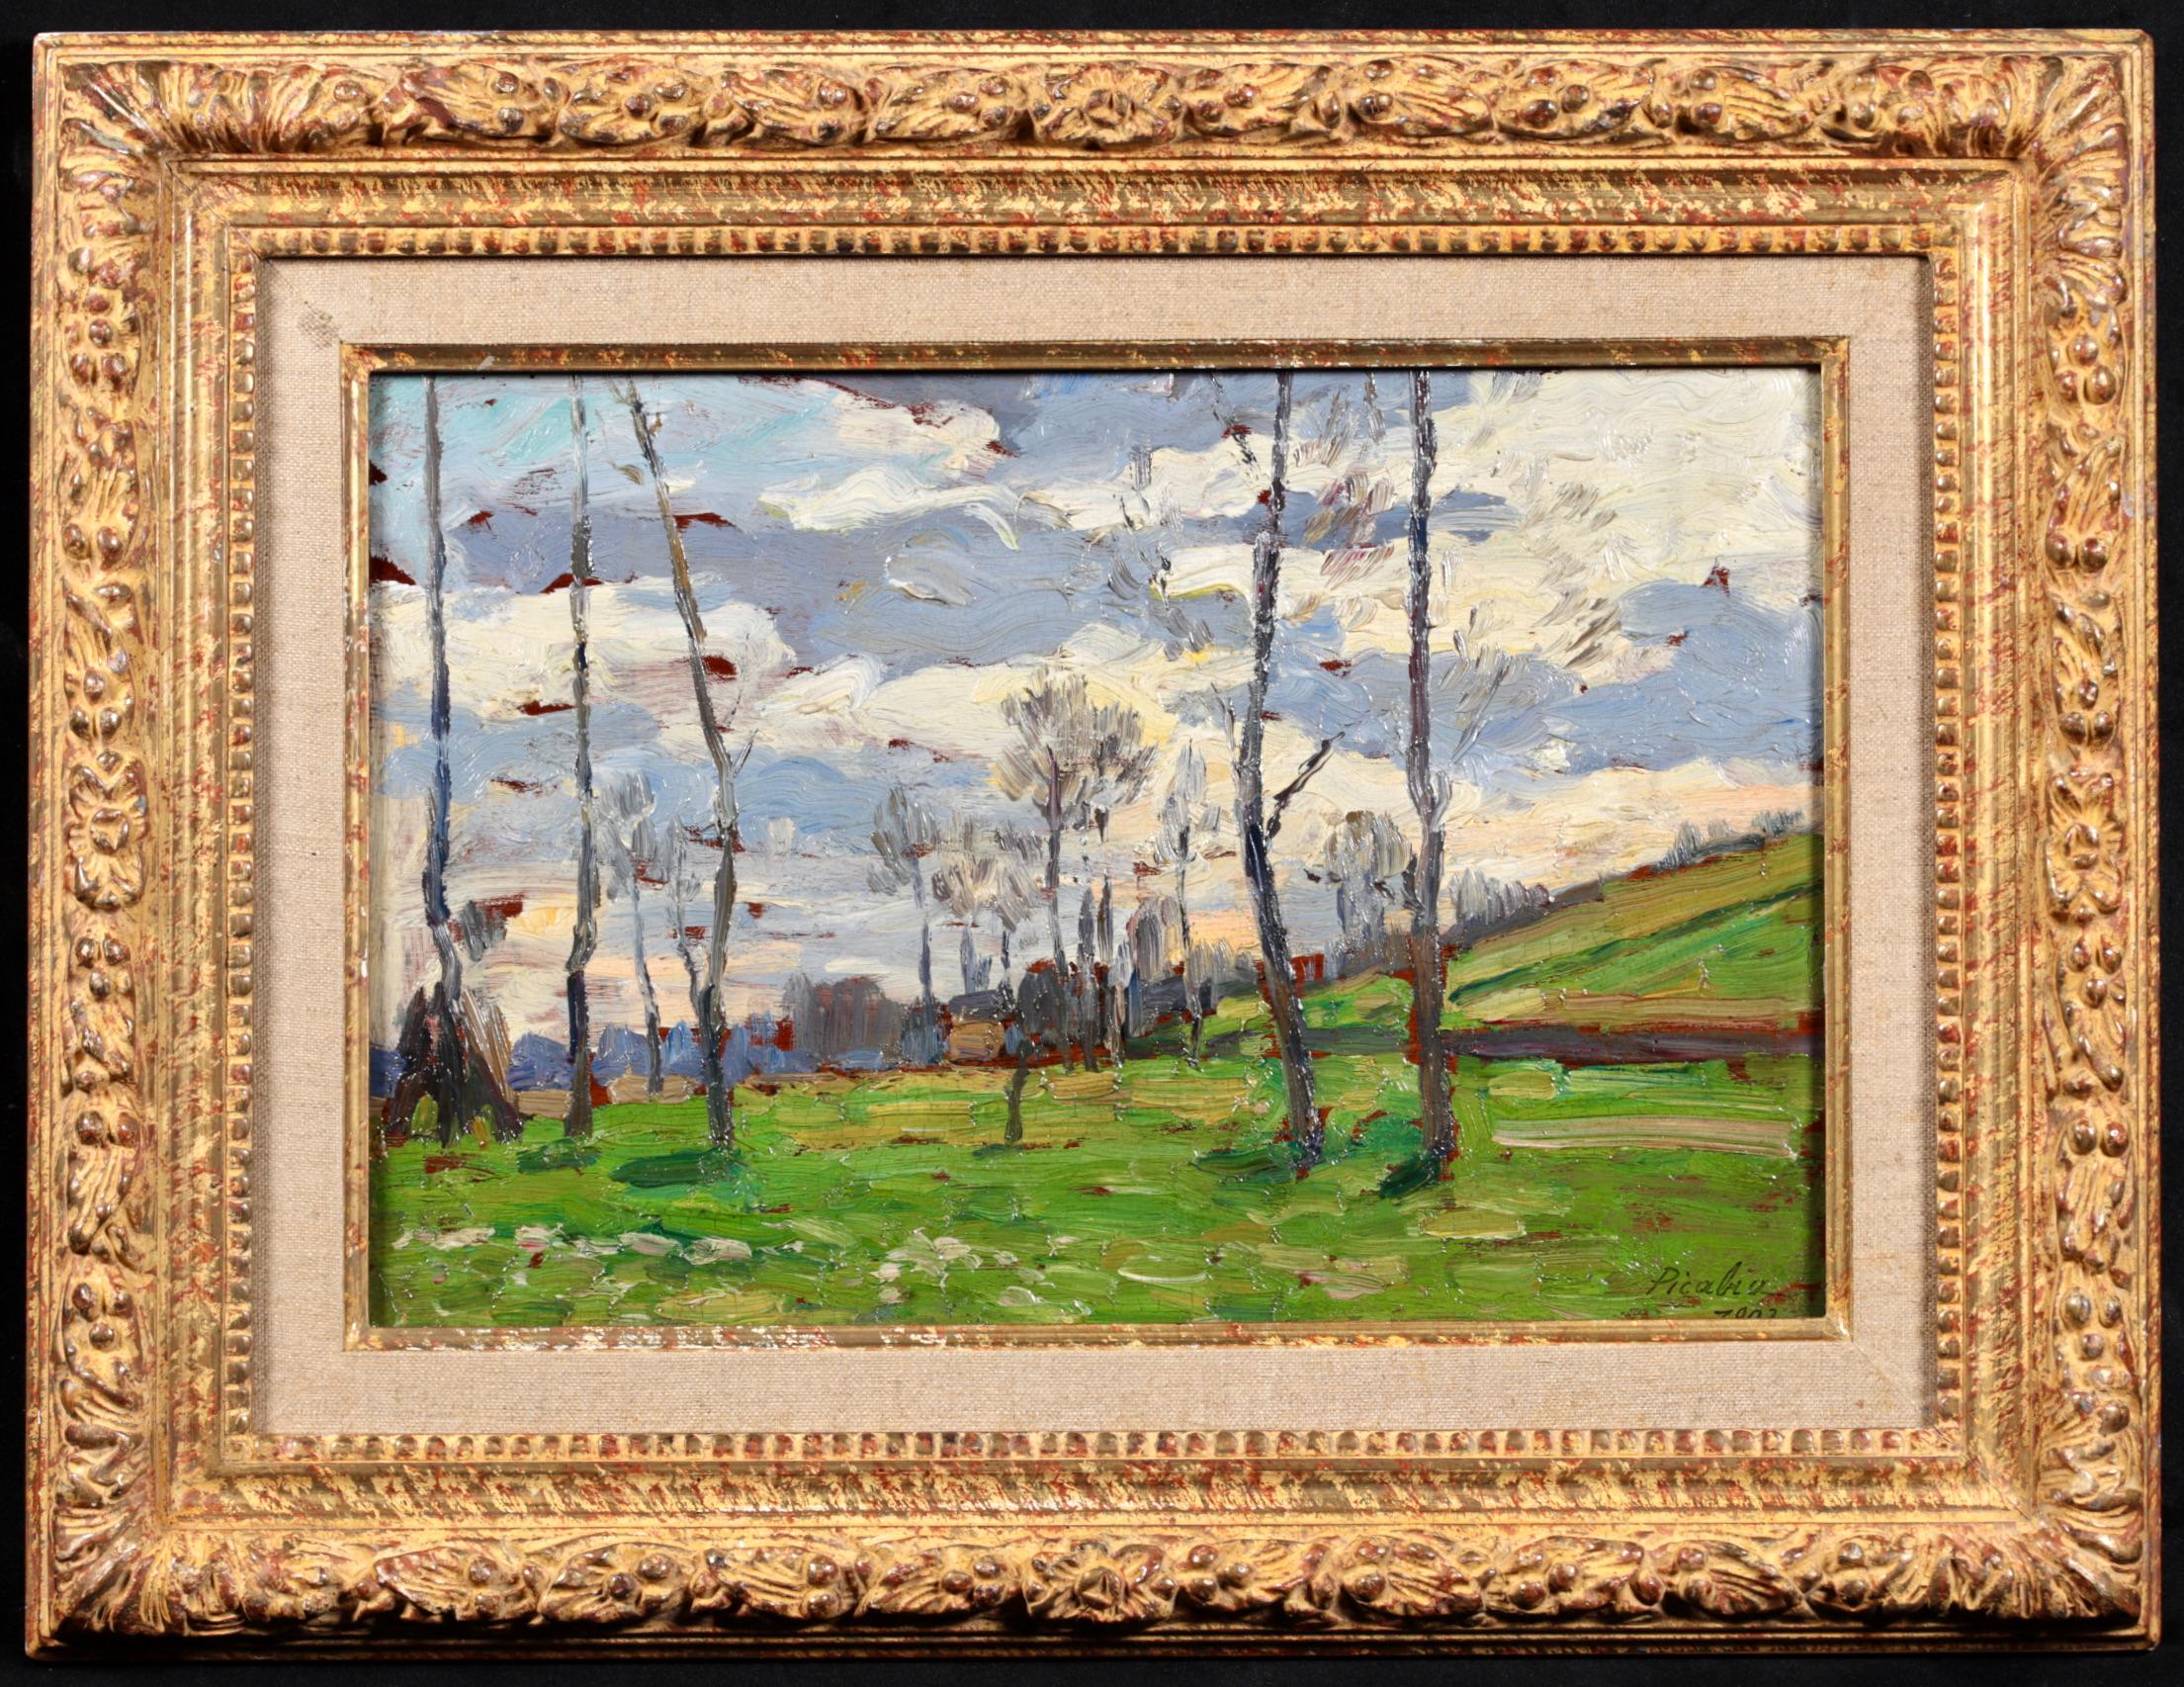 Signed and dated post impressionist oil on panel landscape by French painter Francis Picabia. The work depicts open green grassland with bare trees dotted around and clouds rolling through the blue sky overhead.

Signature:
Signed & dated 1902 lower